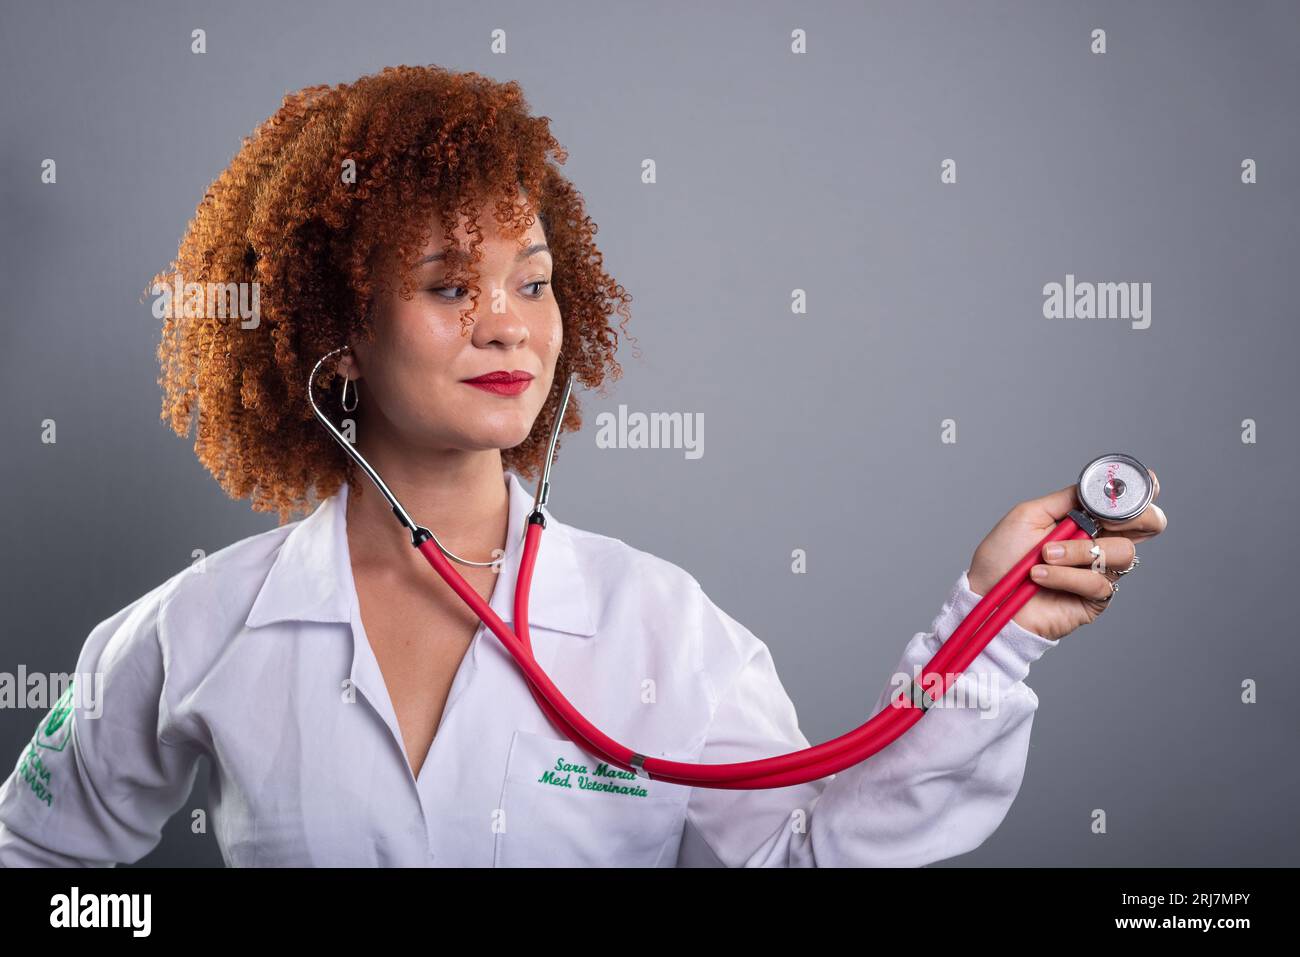 Veterinarian woman, pretty with red hair, showing a stethoscope to the camera in a white uniform. Isolated on gray background. Stock Photo